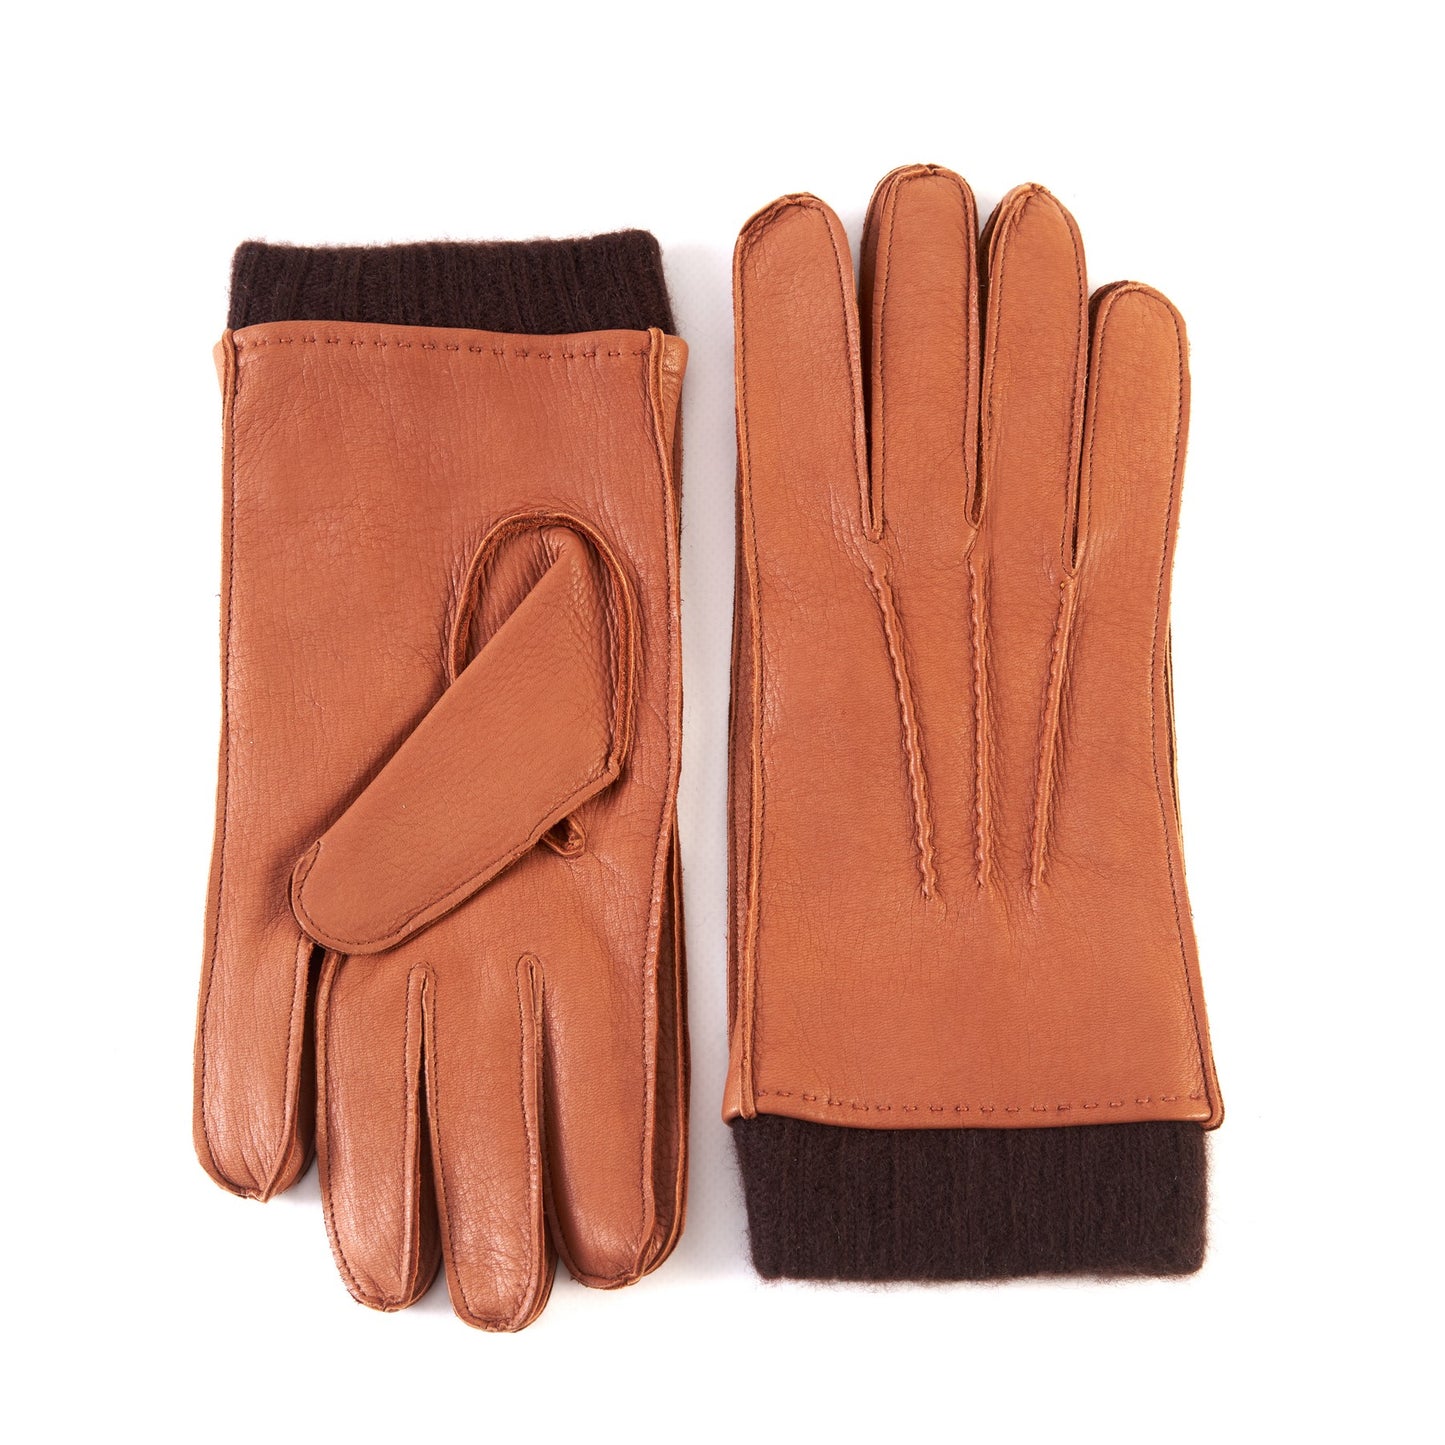 Men's soft brick deerskin gloves with brown cuff and cashmere lining